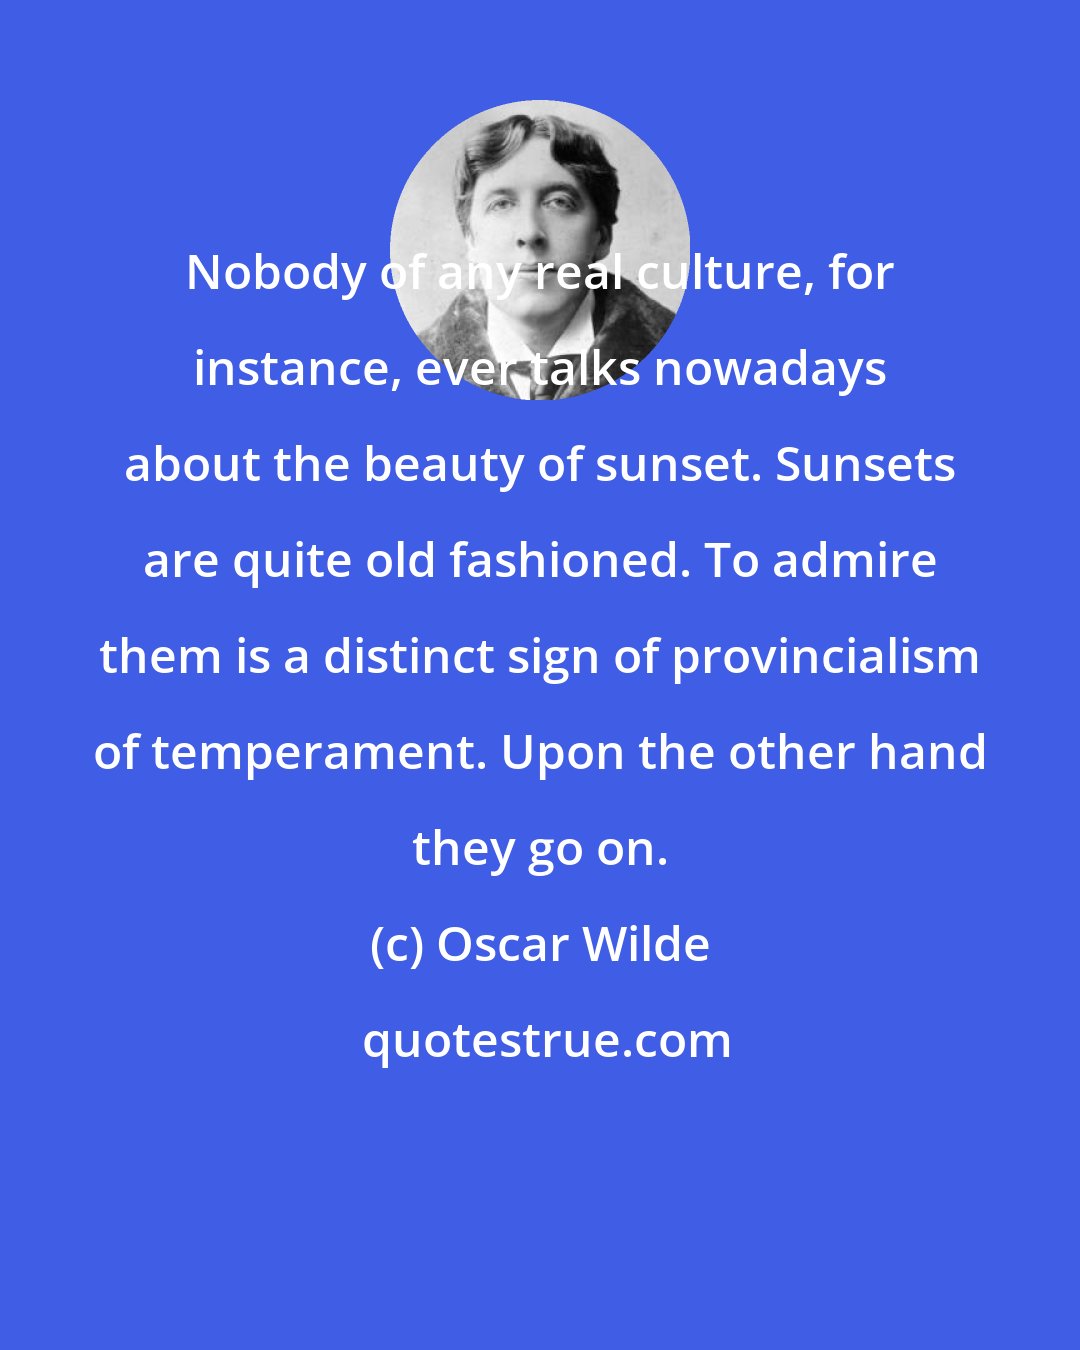 Oscar Wilde: Nobody of any real culture, for instance, ever talks nowadays about the beauty of sunset. Sunsets are quite old fashioned. To admire them is a distinct sign of provincialism of temperament. Upon the other hand they go on.